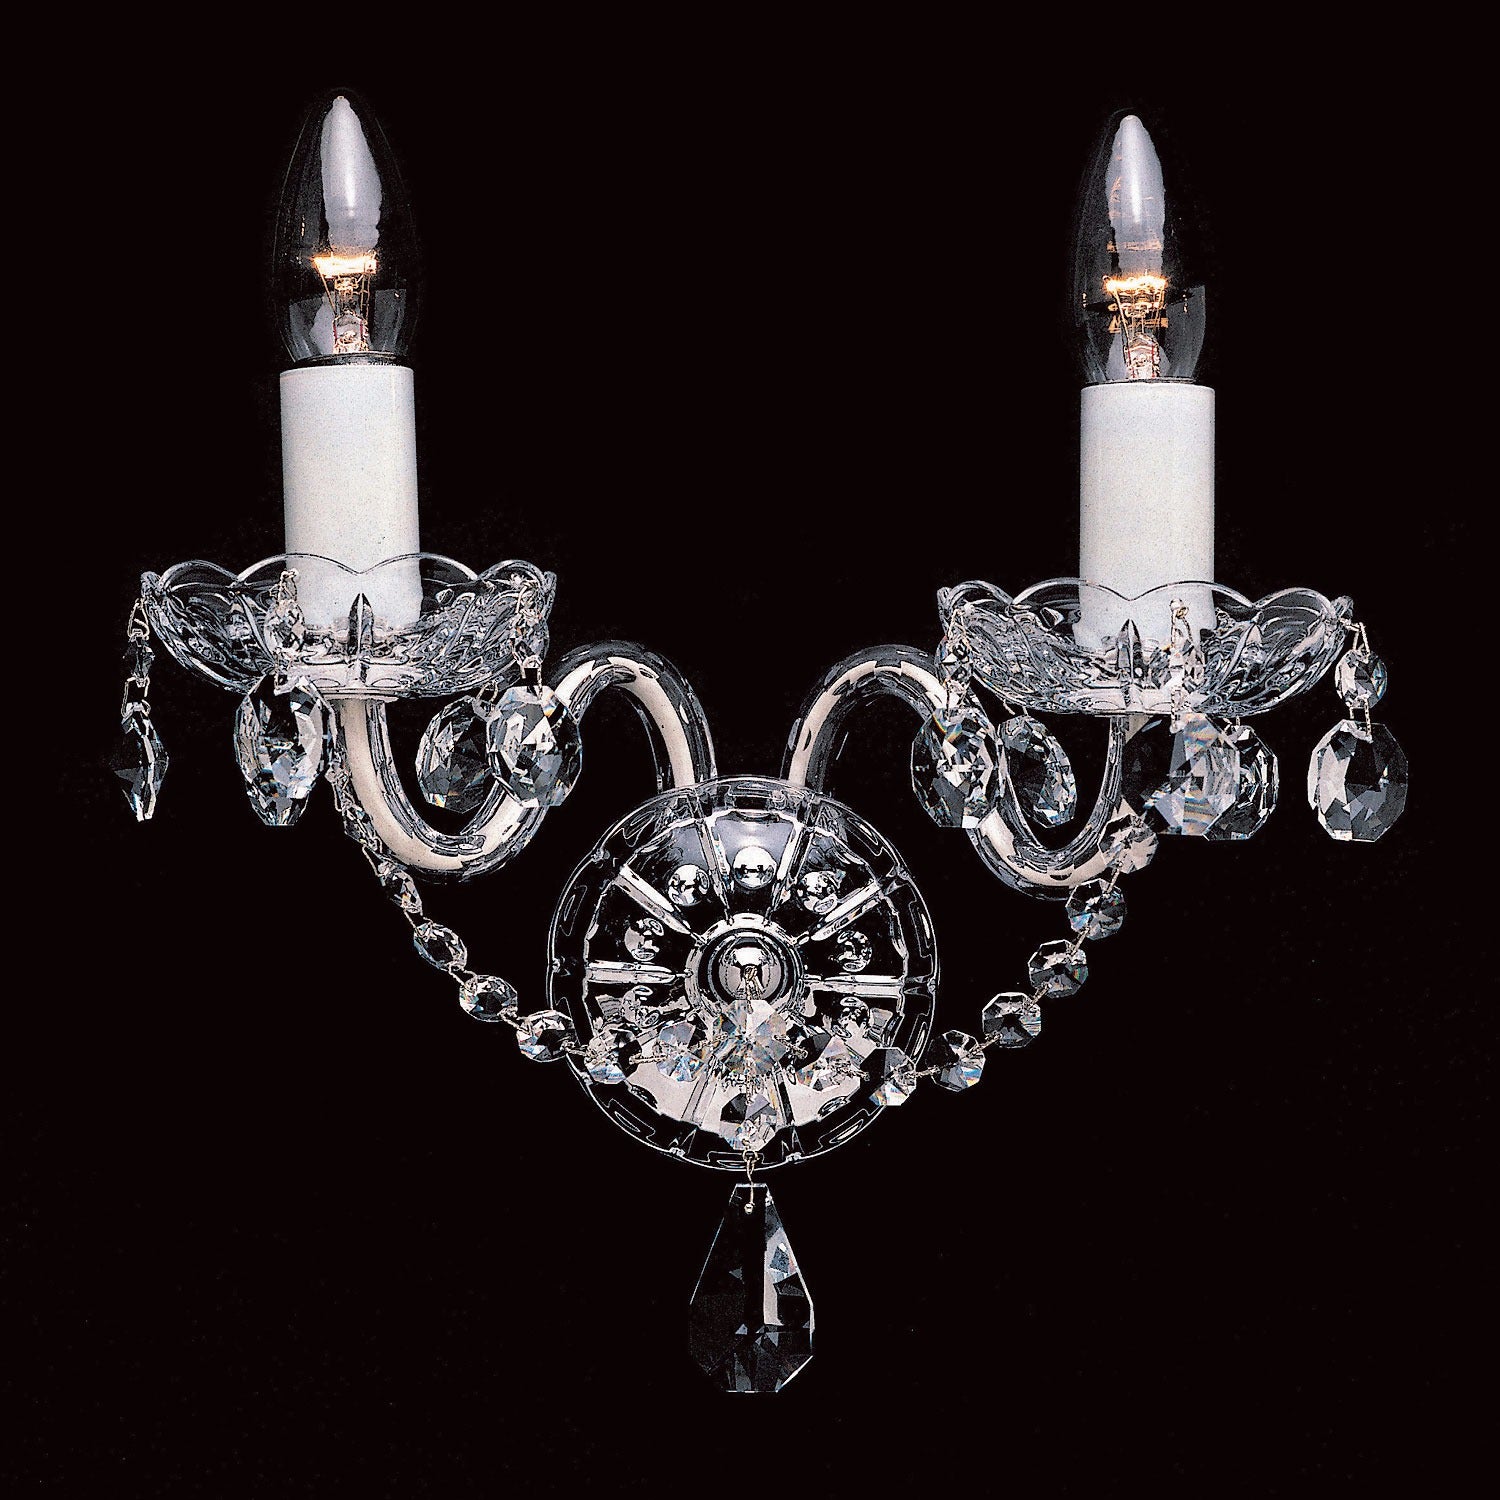 Wall Light with crystal detail